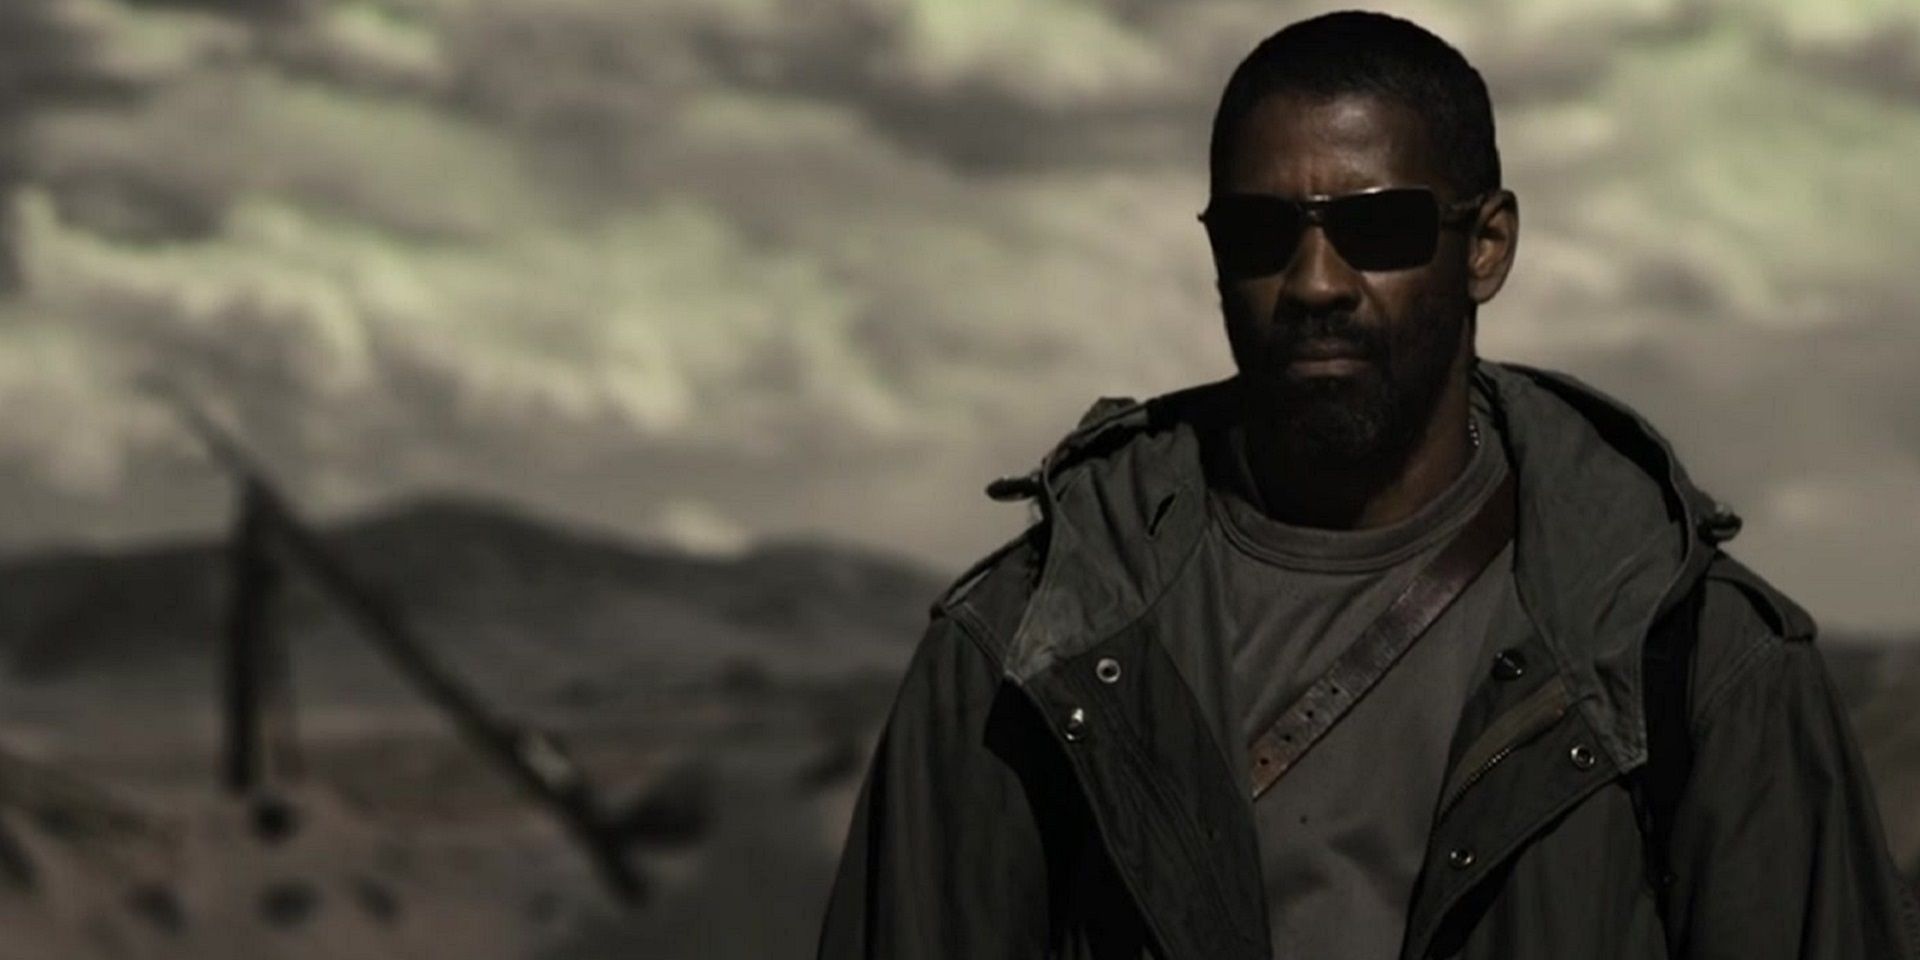 Denzel Washington in the post-apocalyptic wasteland in Elle's book